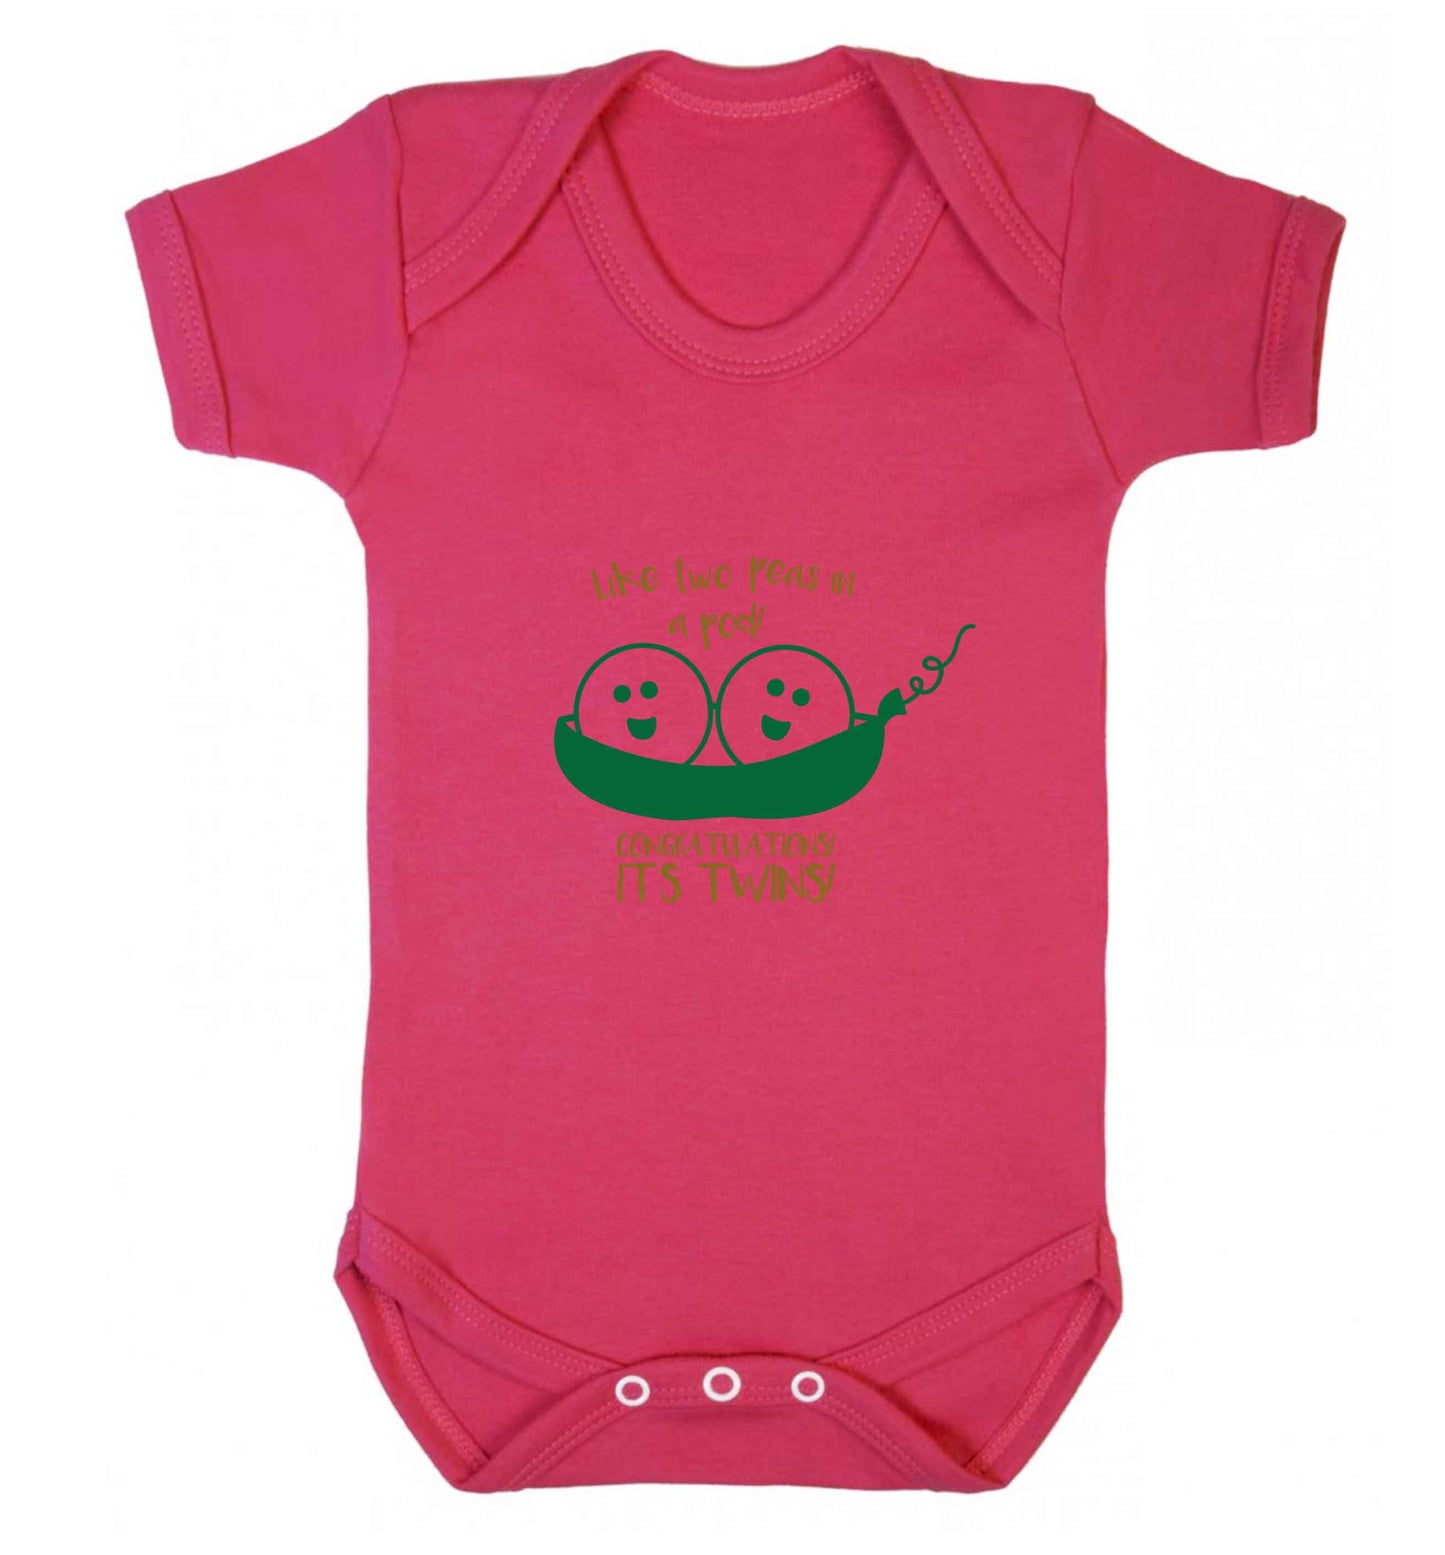 Like two peas in a pod! Congratulations it's twins! baby vest dark pink 18-24 months